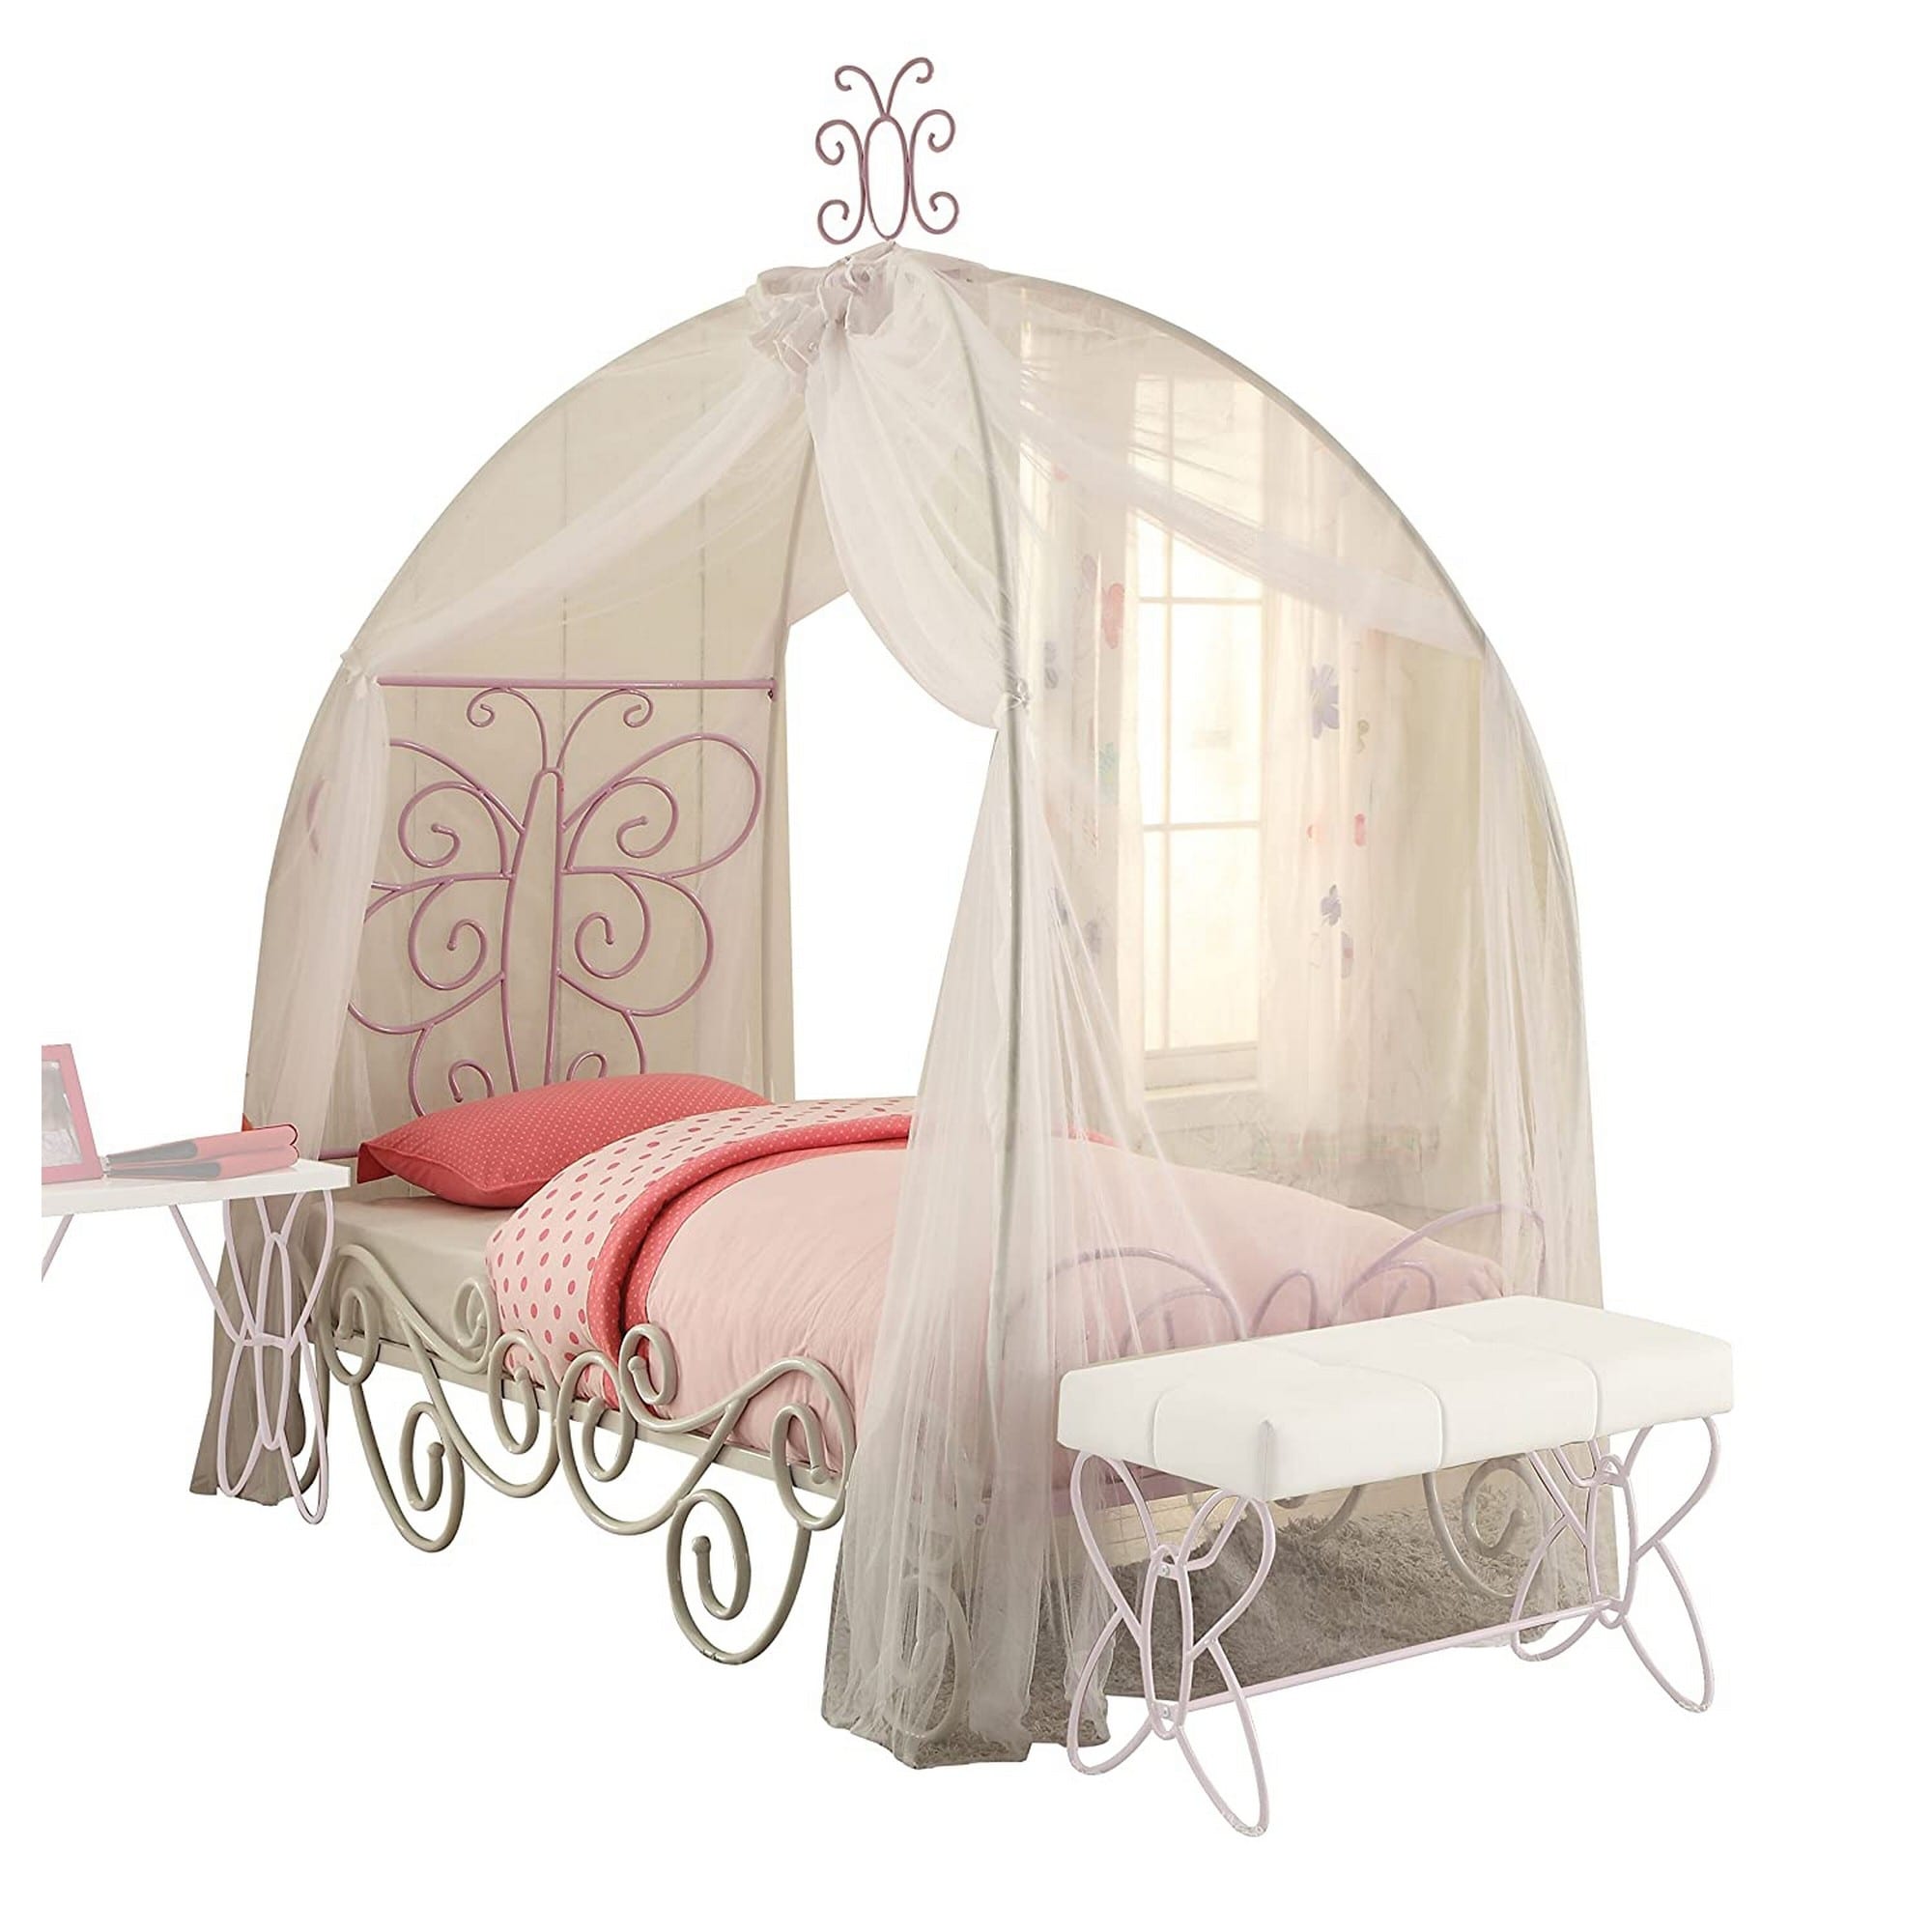 Contemporary Metal Twin Bed with Canopy and Scrolled Work Details, White and Purple